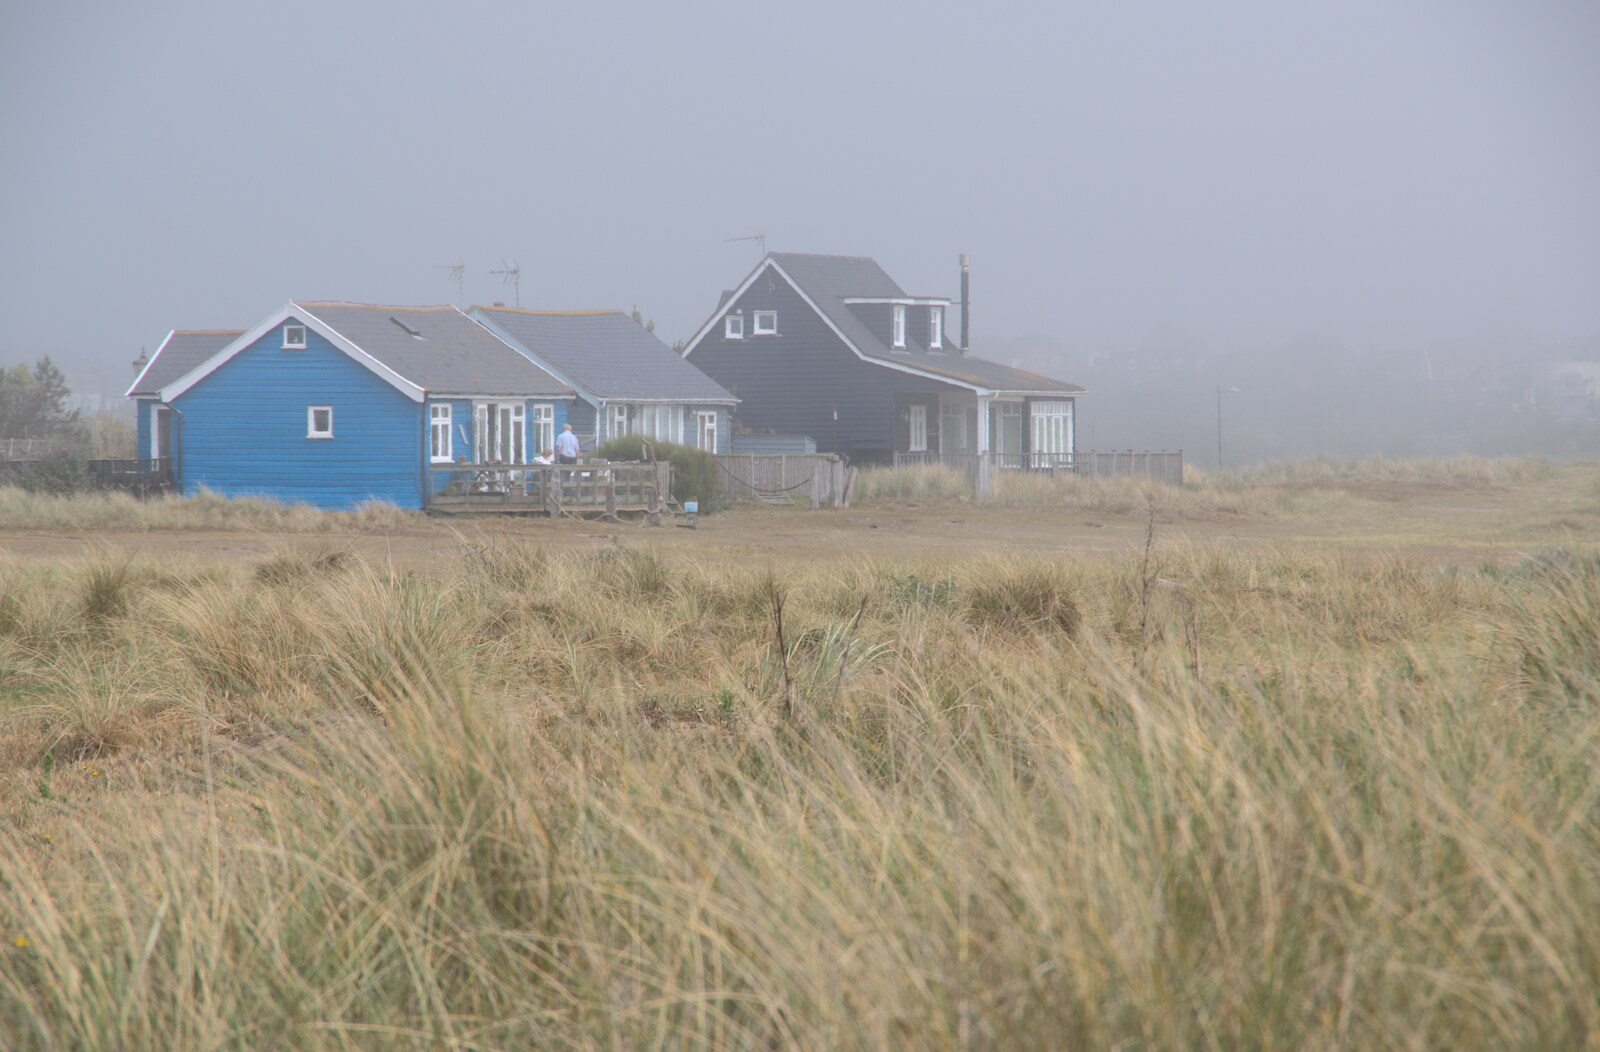 There's a bit of sea mist around when we get there from A Return to Southwold, Suffolk - 14th June 2020